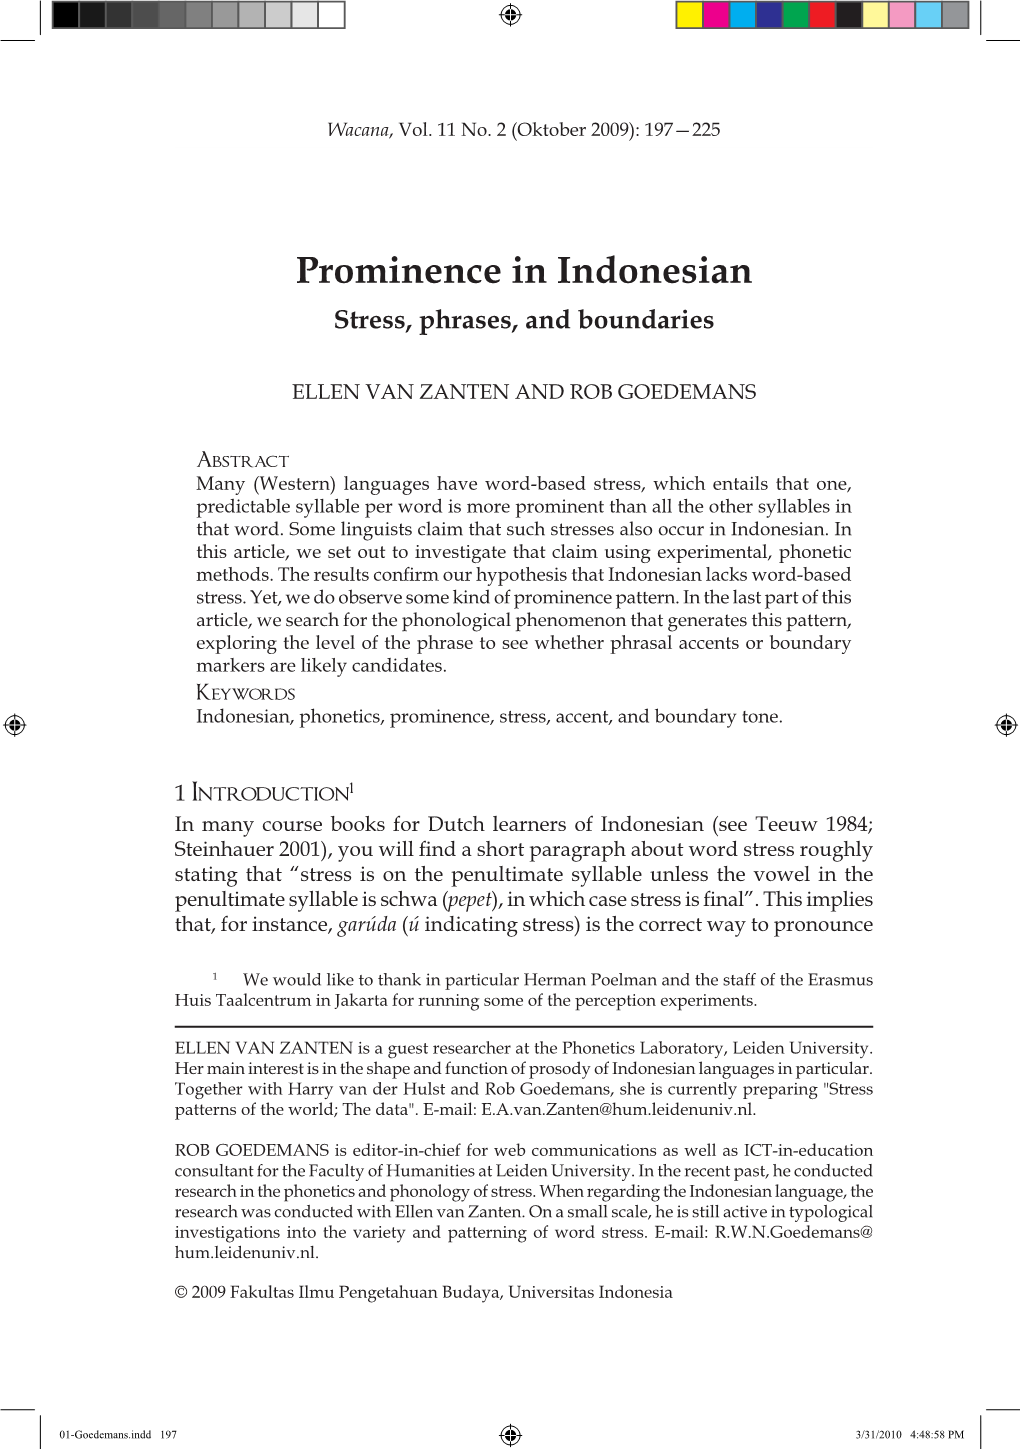 Prominence in Indonesian Stress, Phrases, and Boundaries